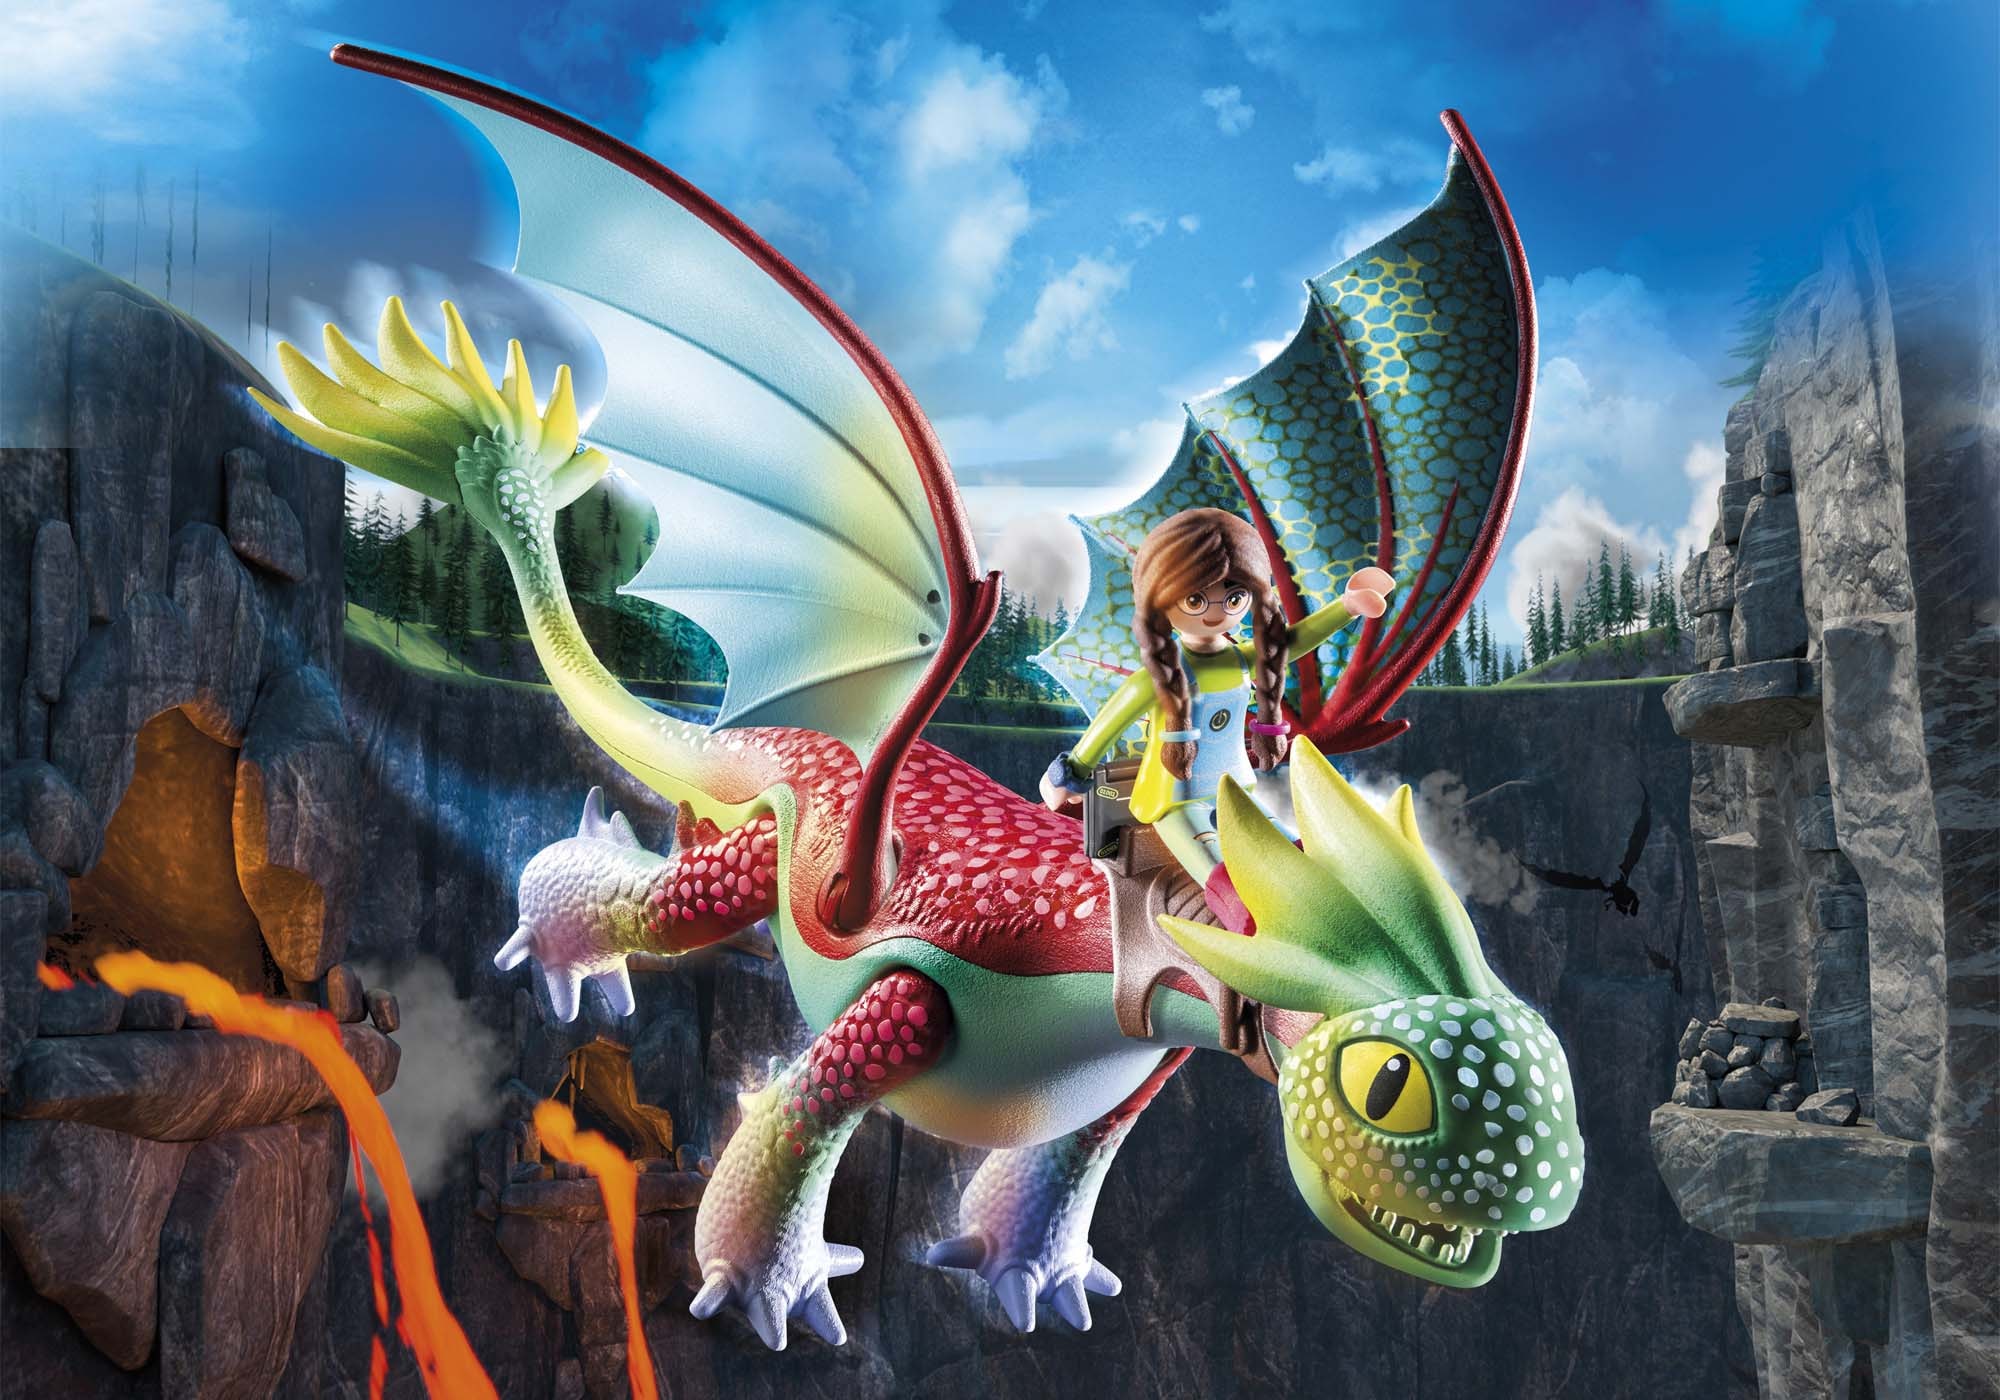 Playmobil® Konstruktions-Spielset »Dragons: The Nine Realms - Feathers & Alex (71083)«, (14 St.), Made in Germany